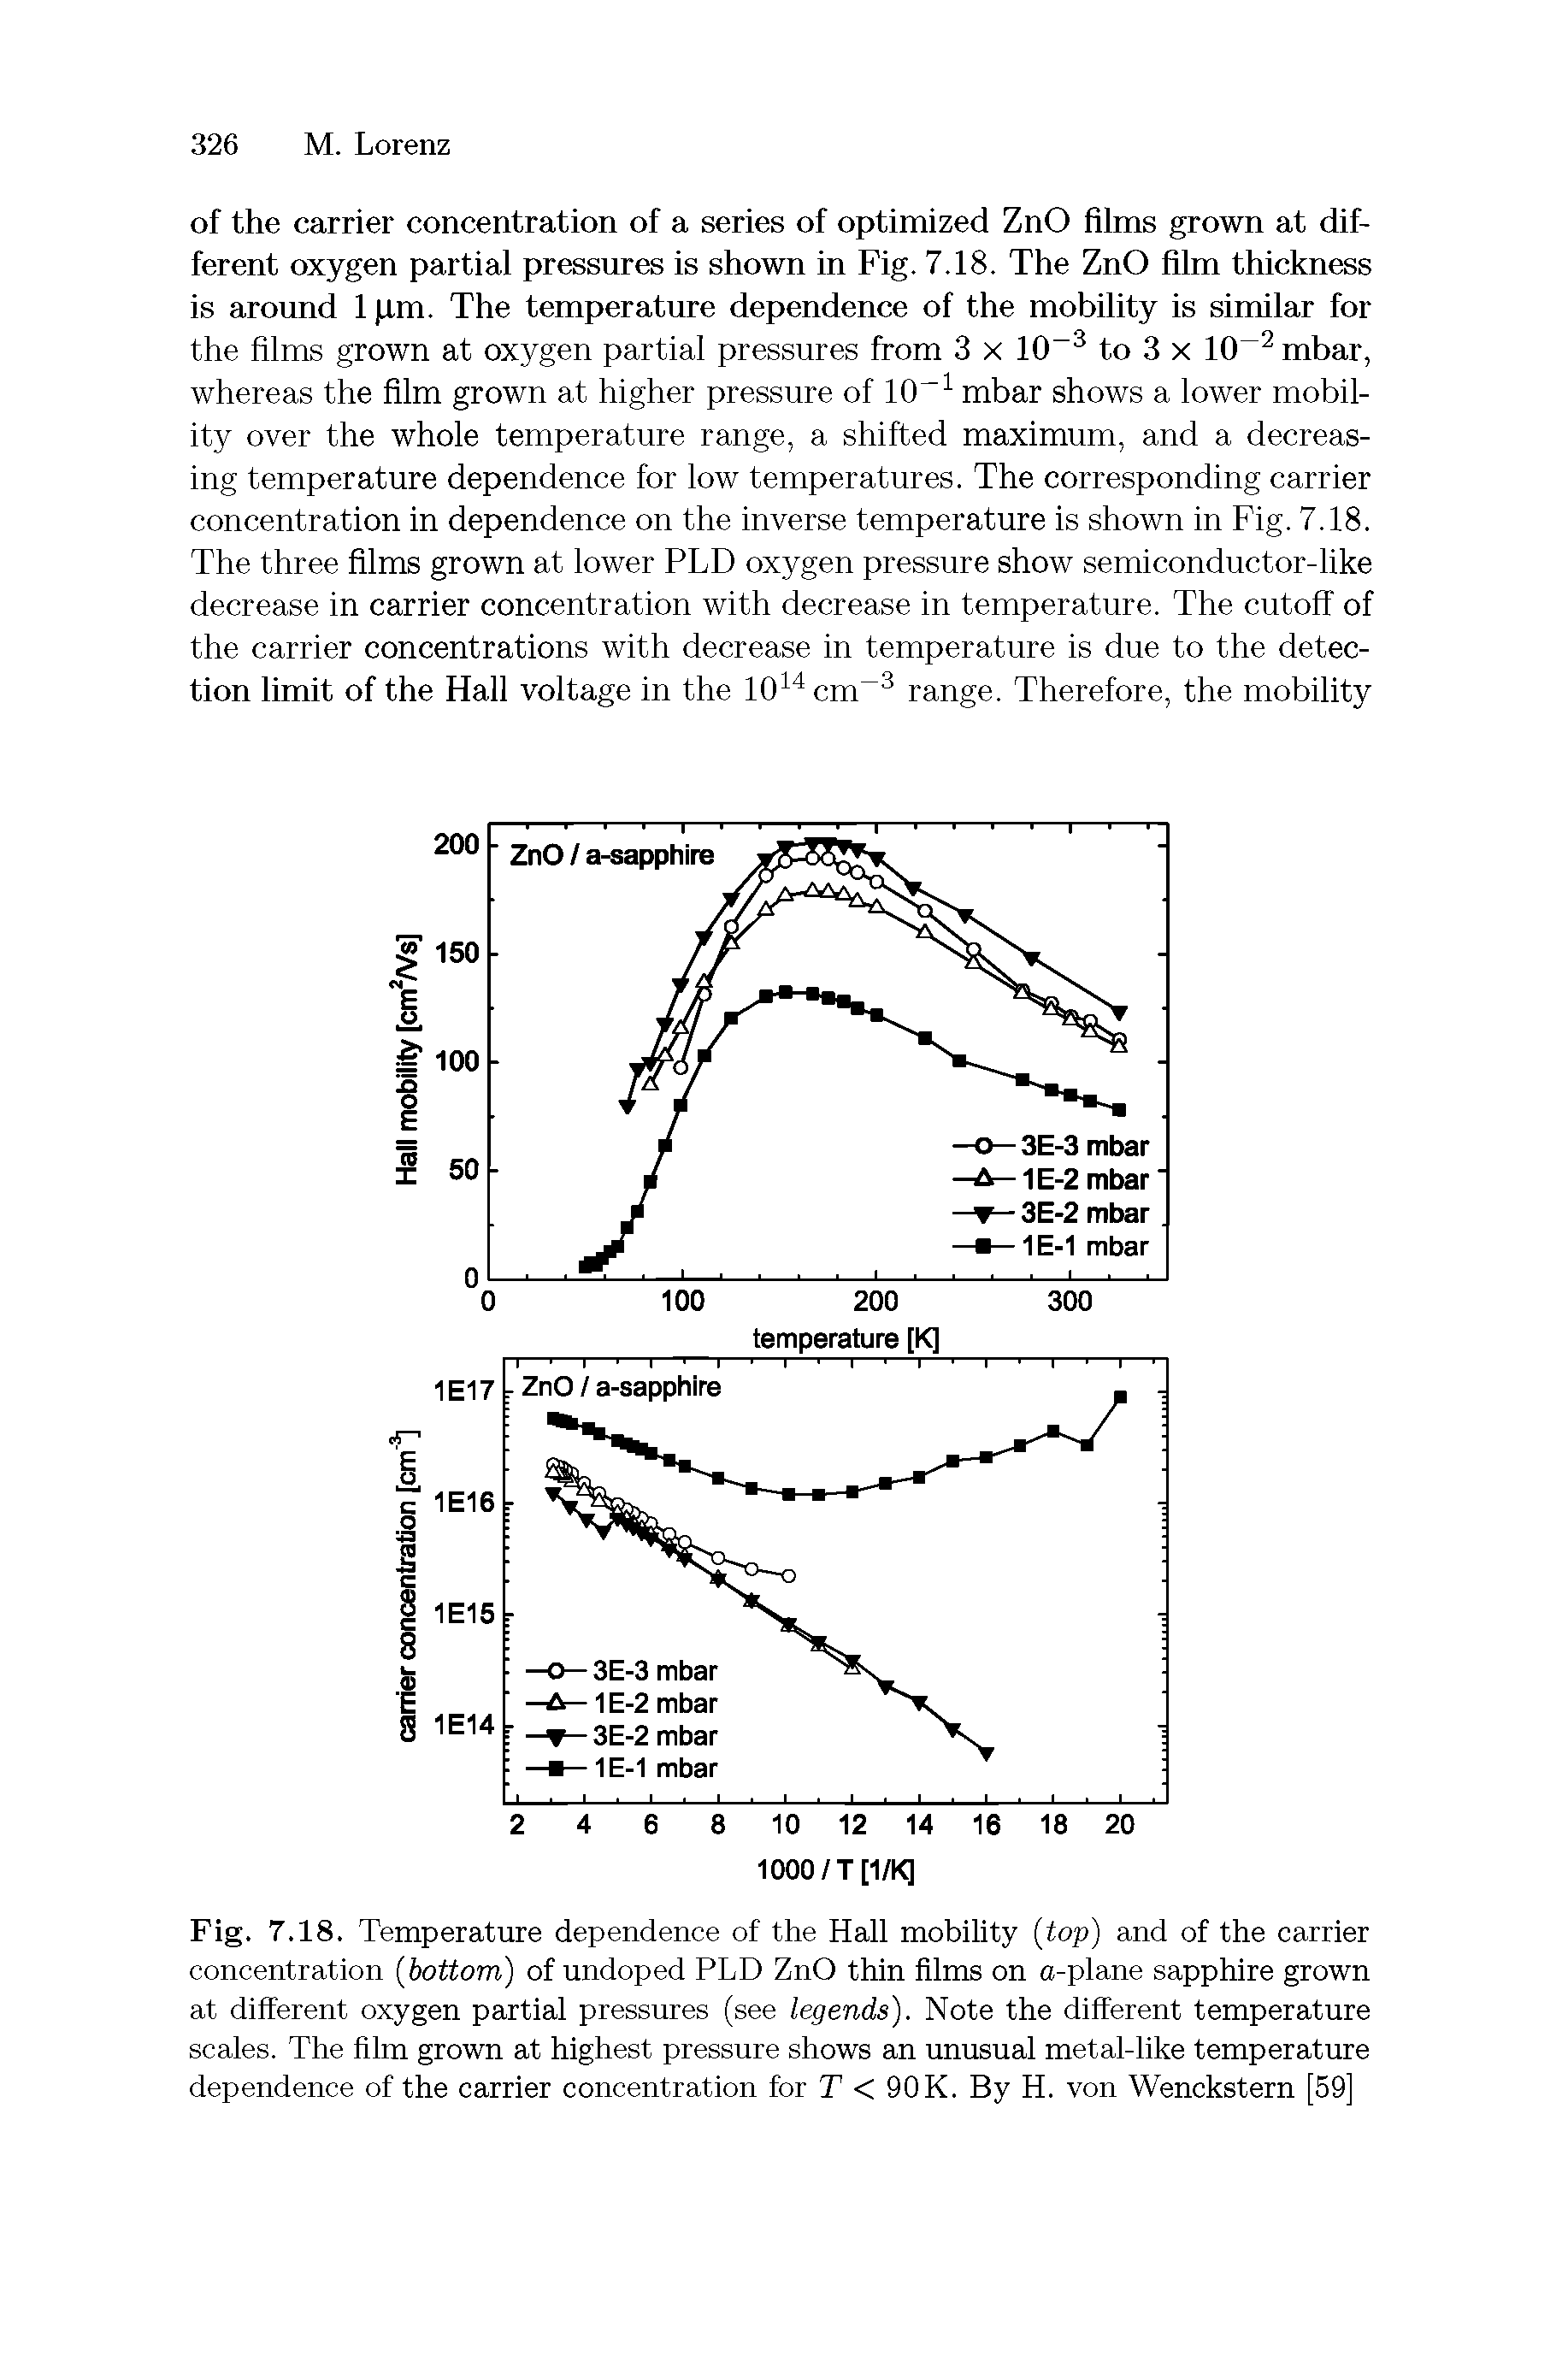 Fig. 7.18. Temperature dependence of the Hall mobility (top) and of the carrier concentration (bottom) of undoped PLD ZnO thin films on a-plane sapphire grown at different oxygen partial pressures (see legends). Note the different temperature scales. The film grown at highest pressure shows an unusual metal-like temperature dependence of the carrier concentration for T < 90K. By H. von Wenckstern [59]...